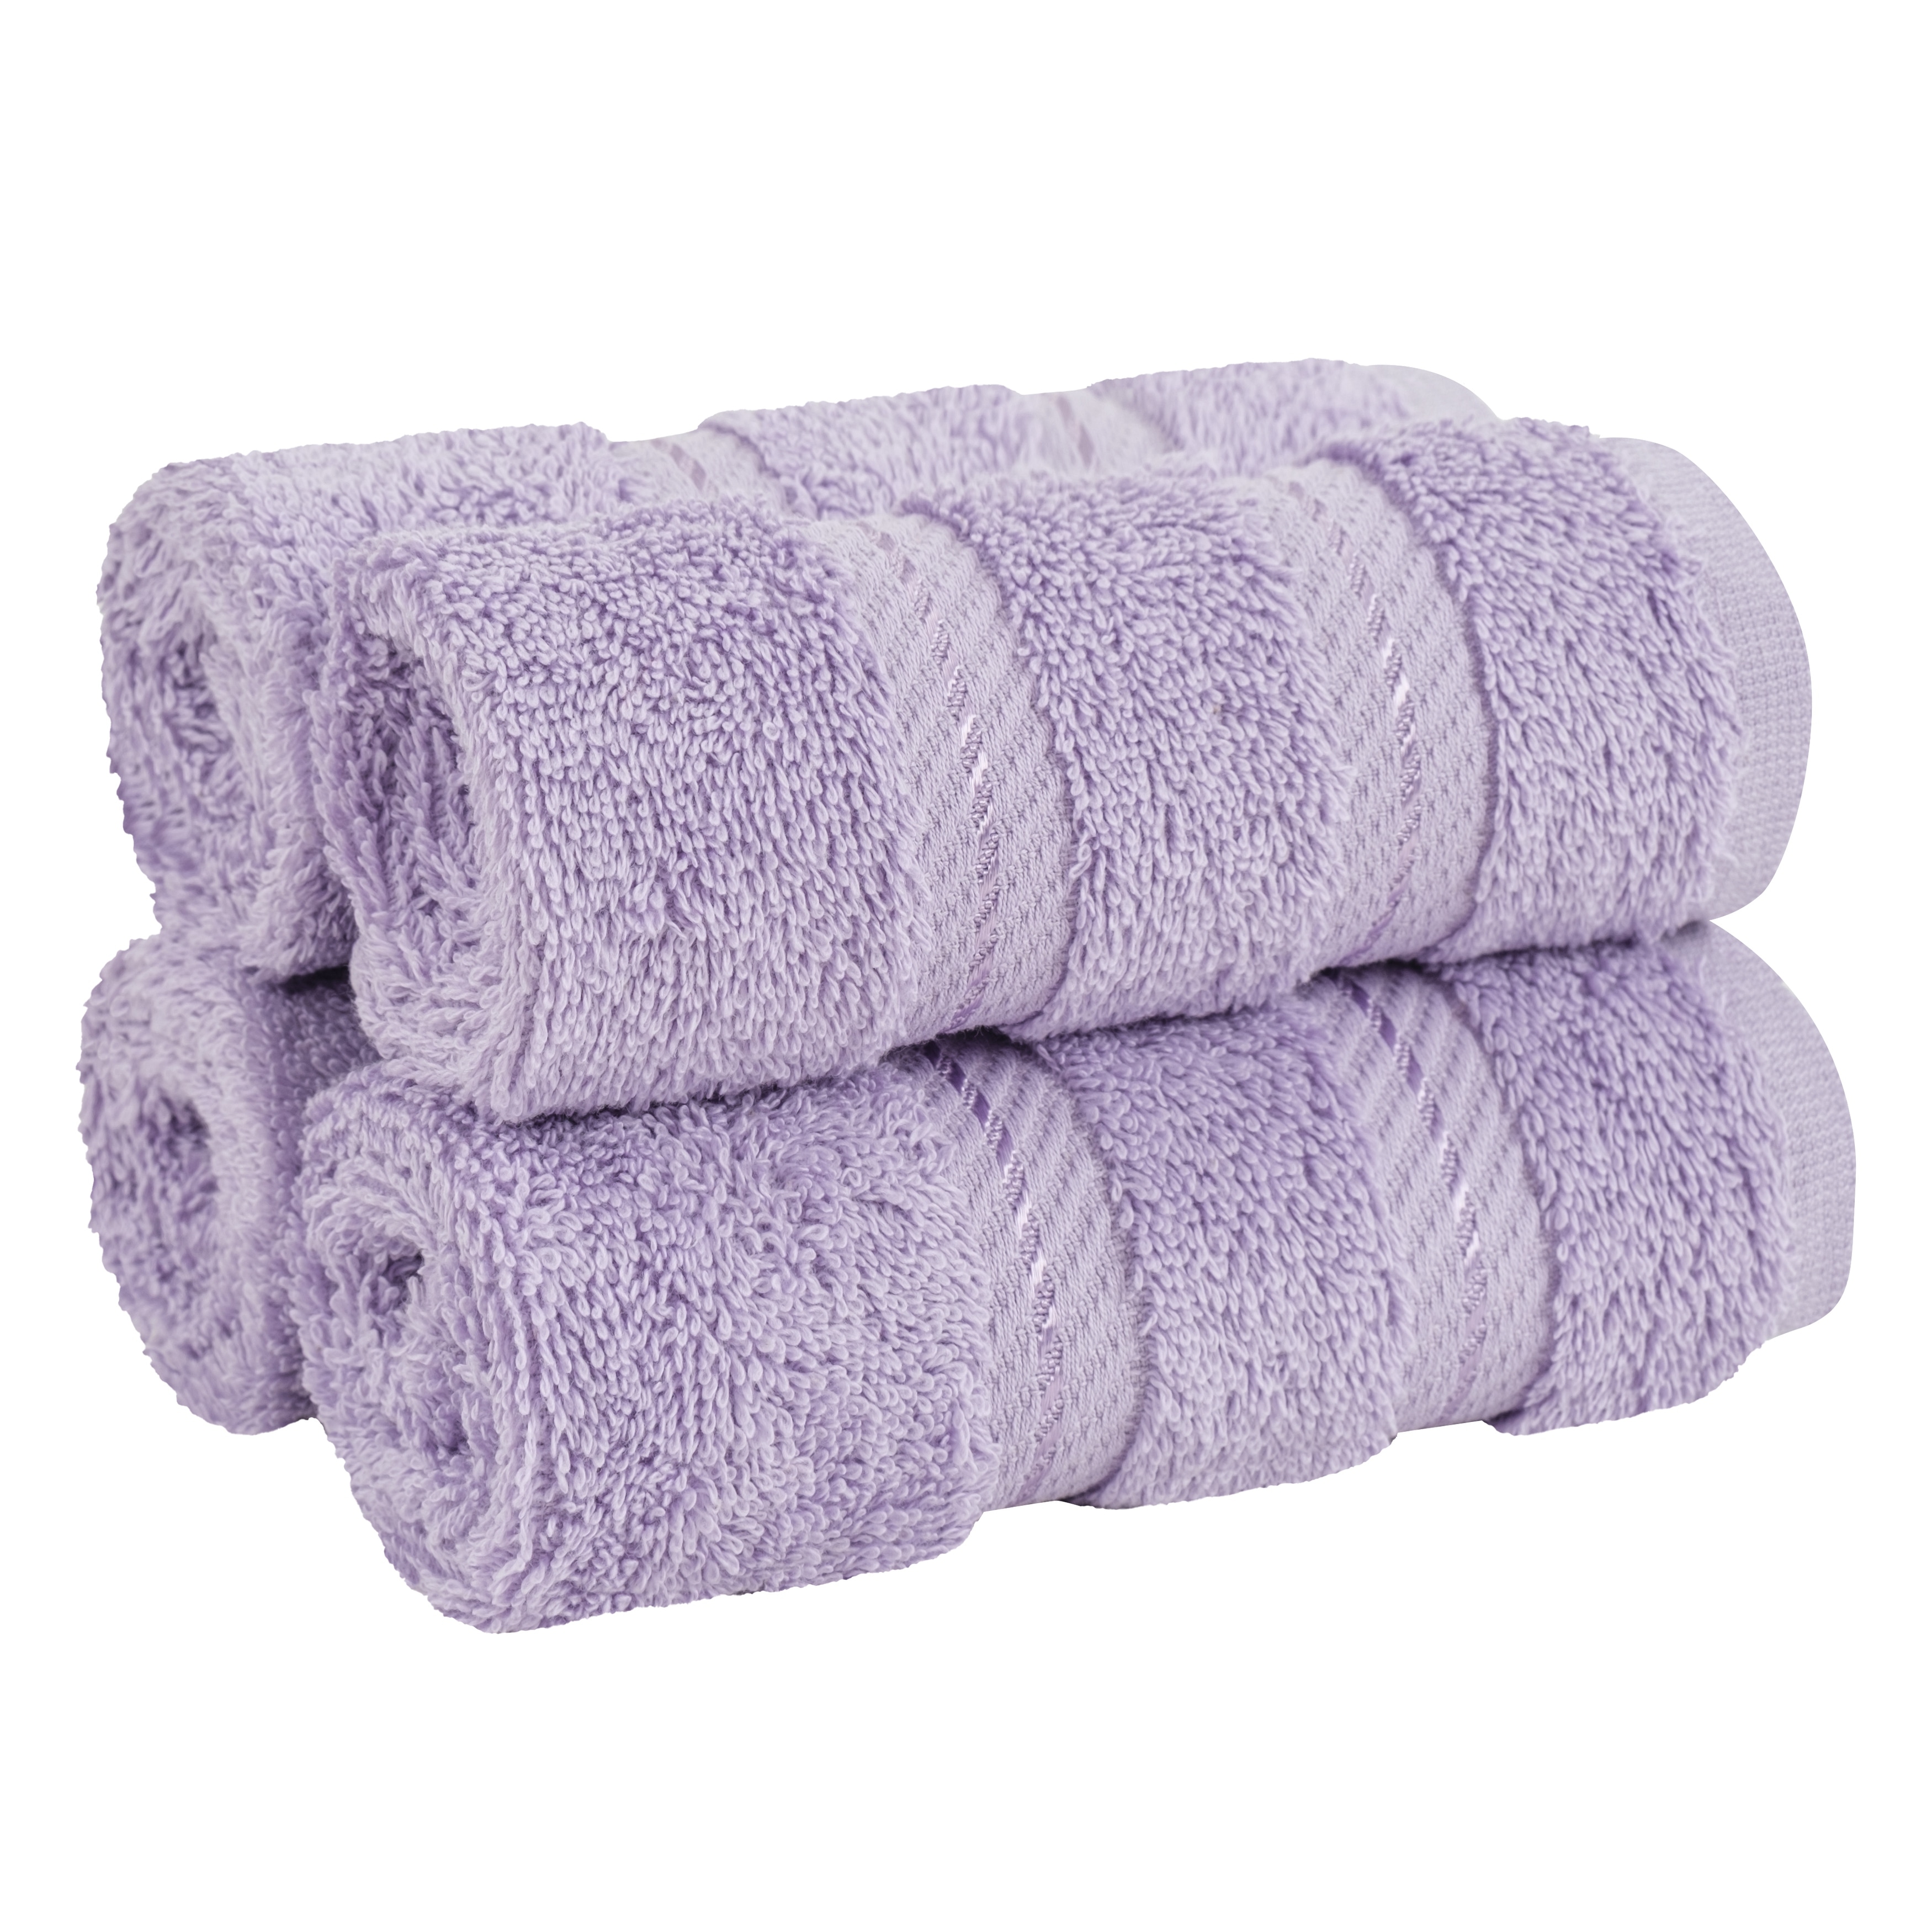 Authentic Hotel and Spa Omni Turkish Cotton Terry Washcloths (Set of 6) -  On Sale - Bed Bath & Beyond - 11090783